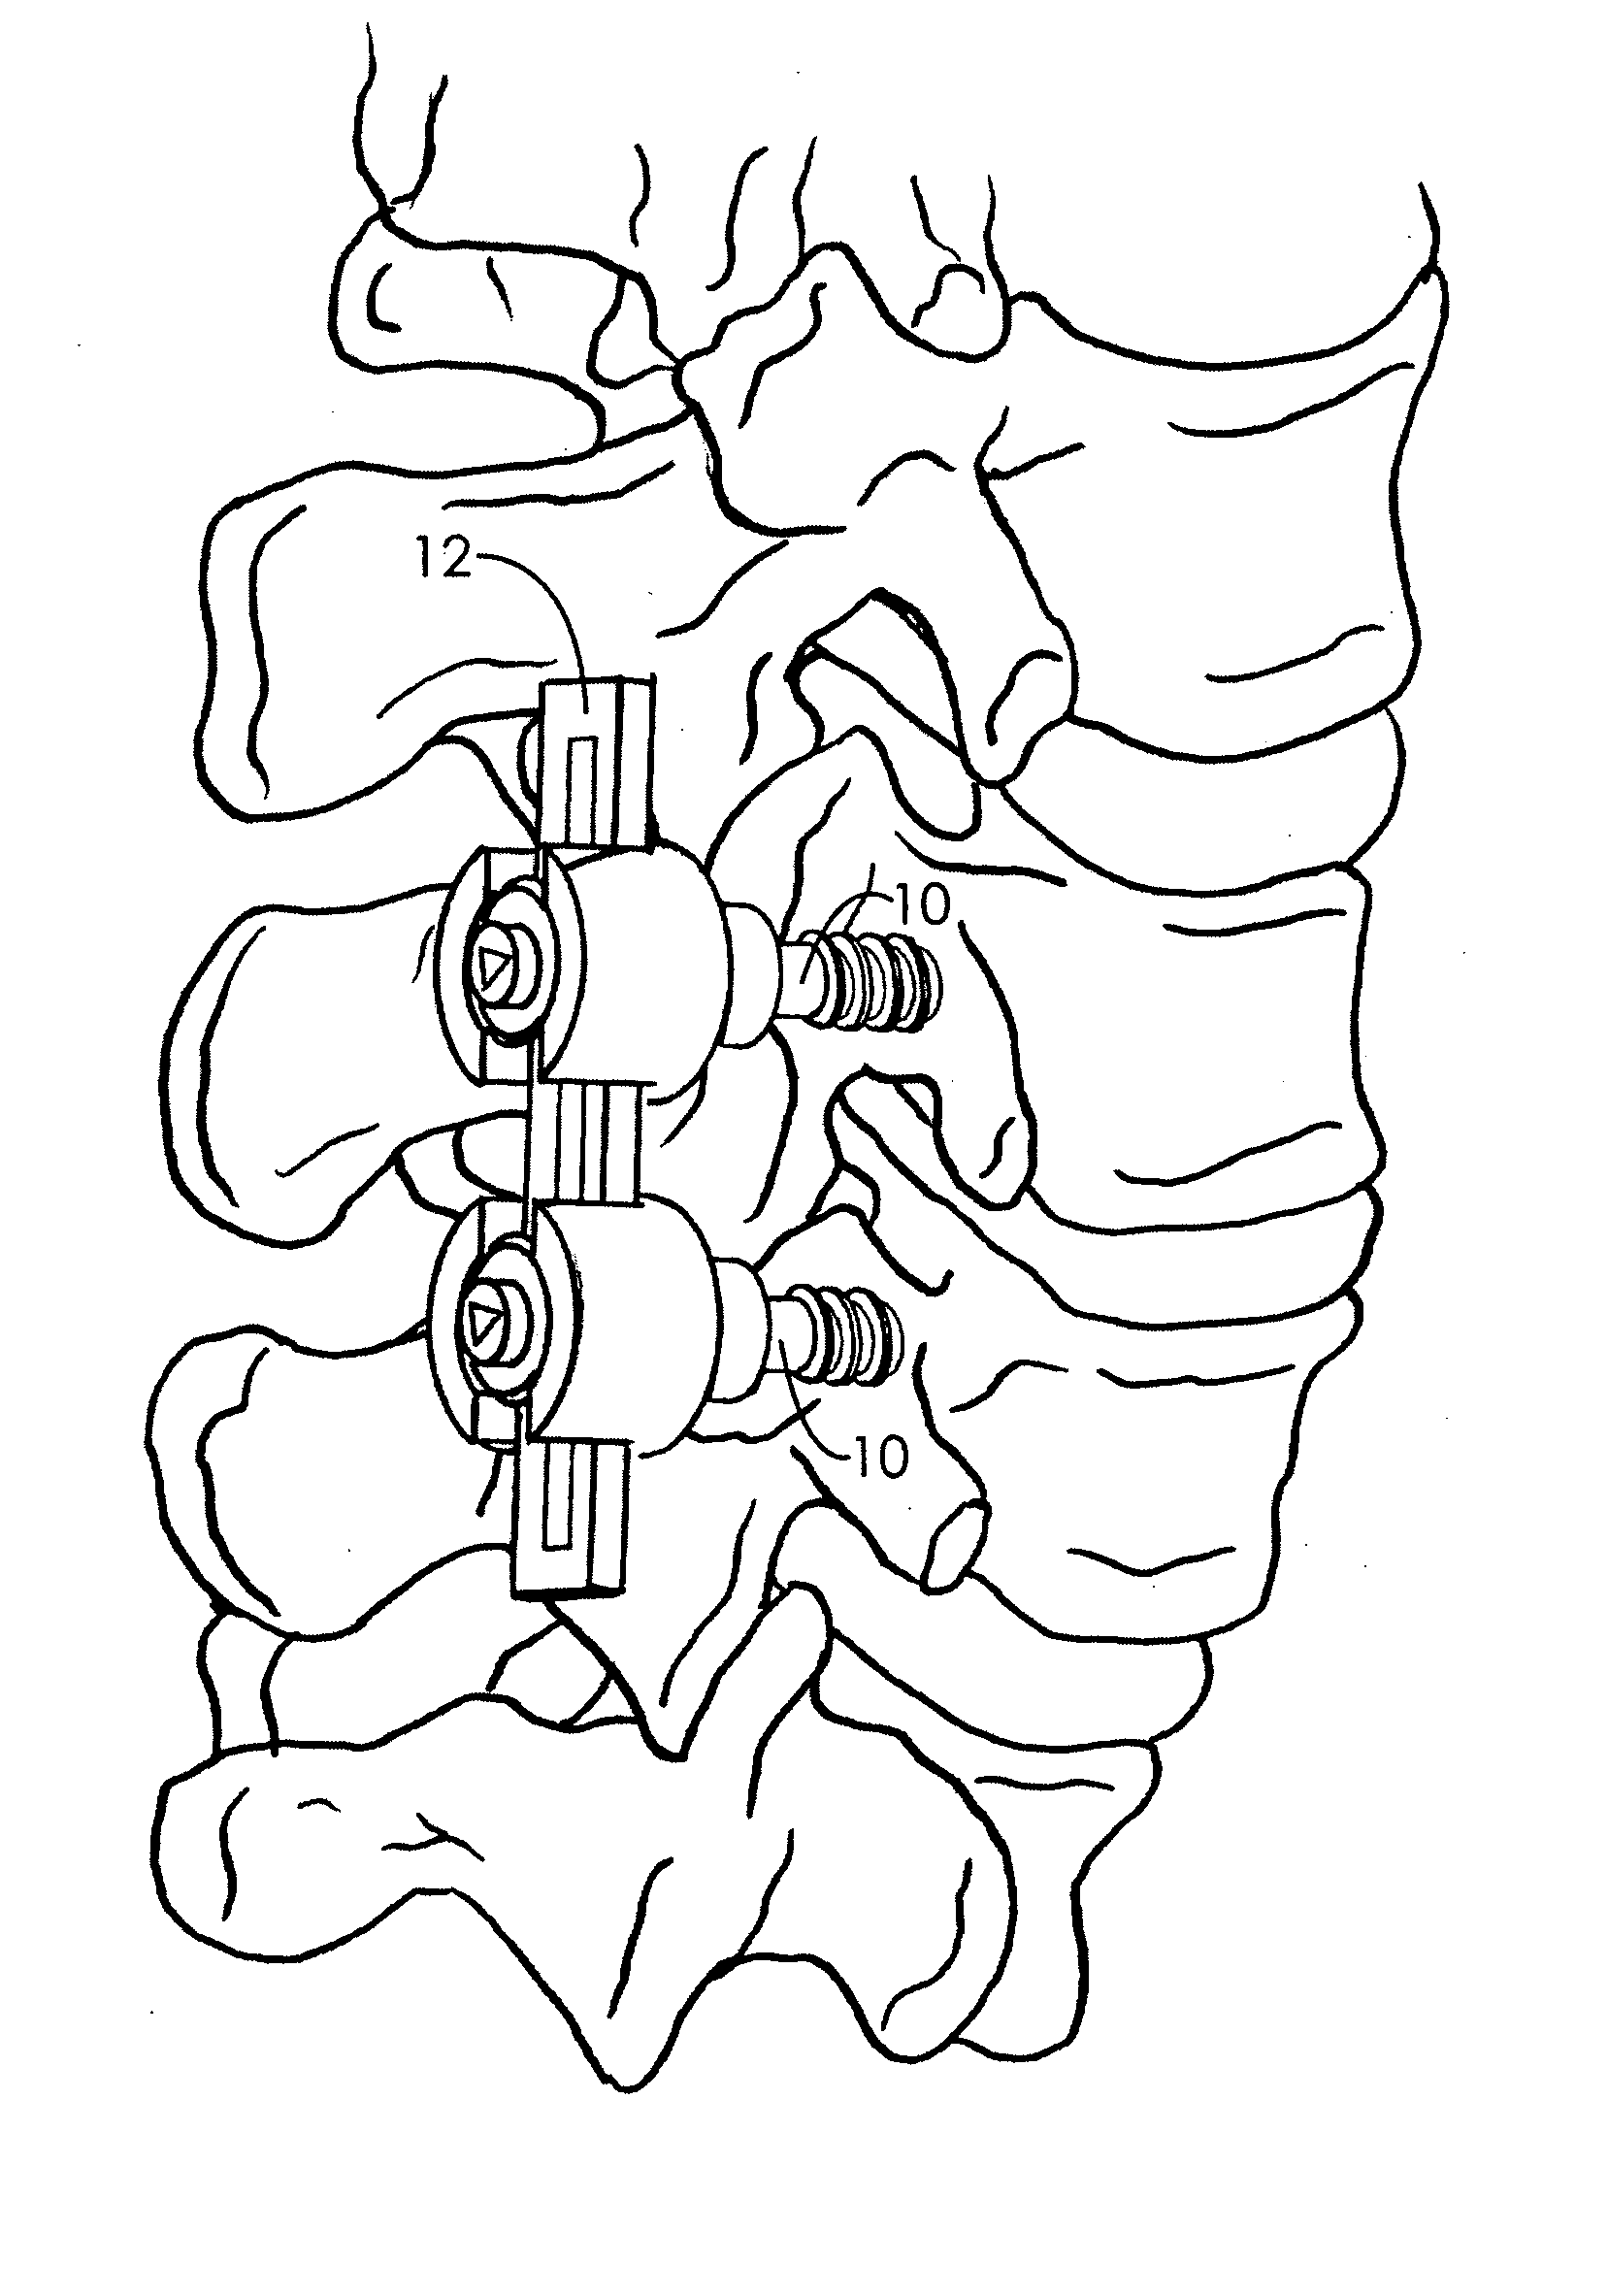 Spinal fixation system